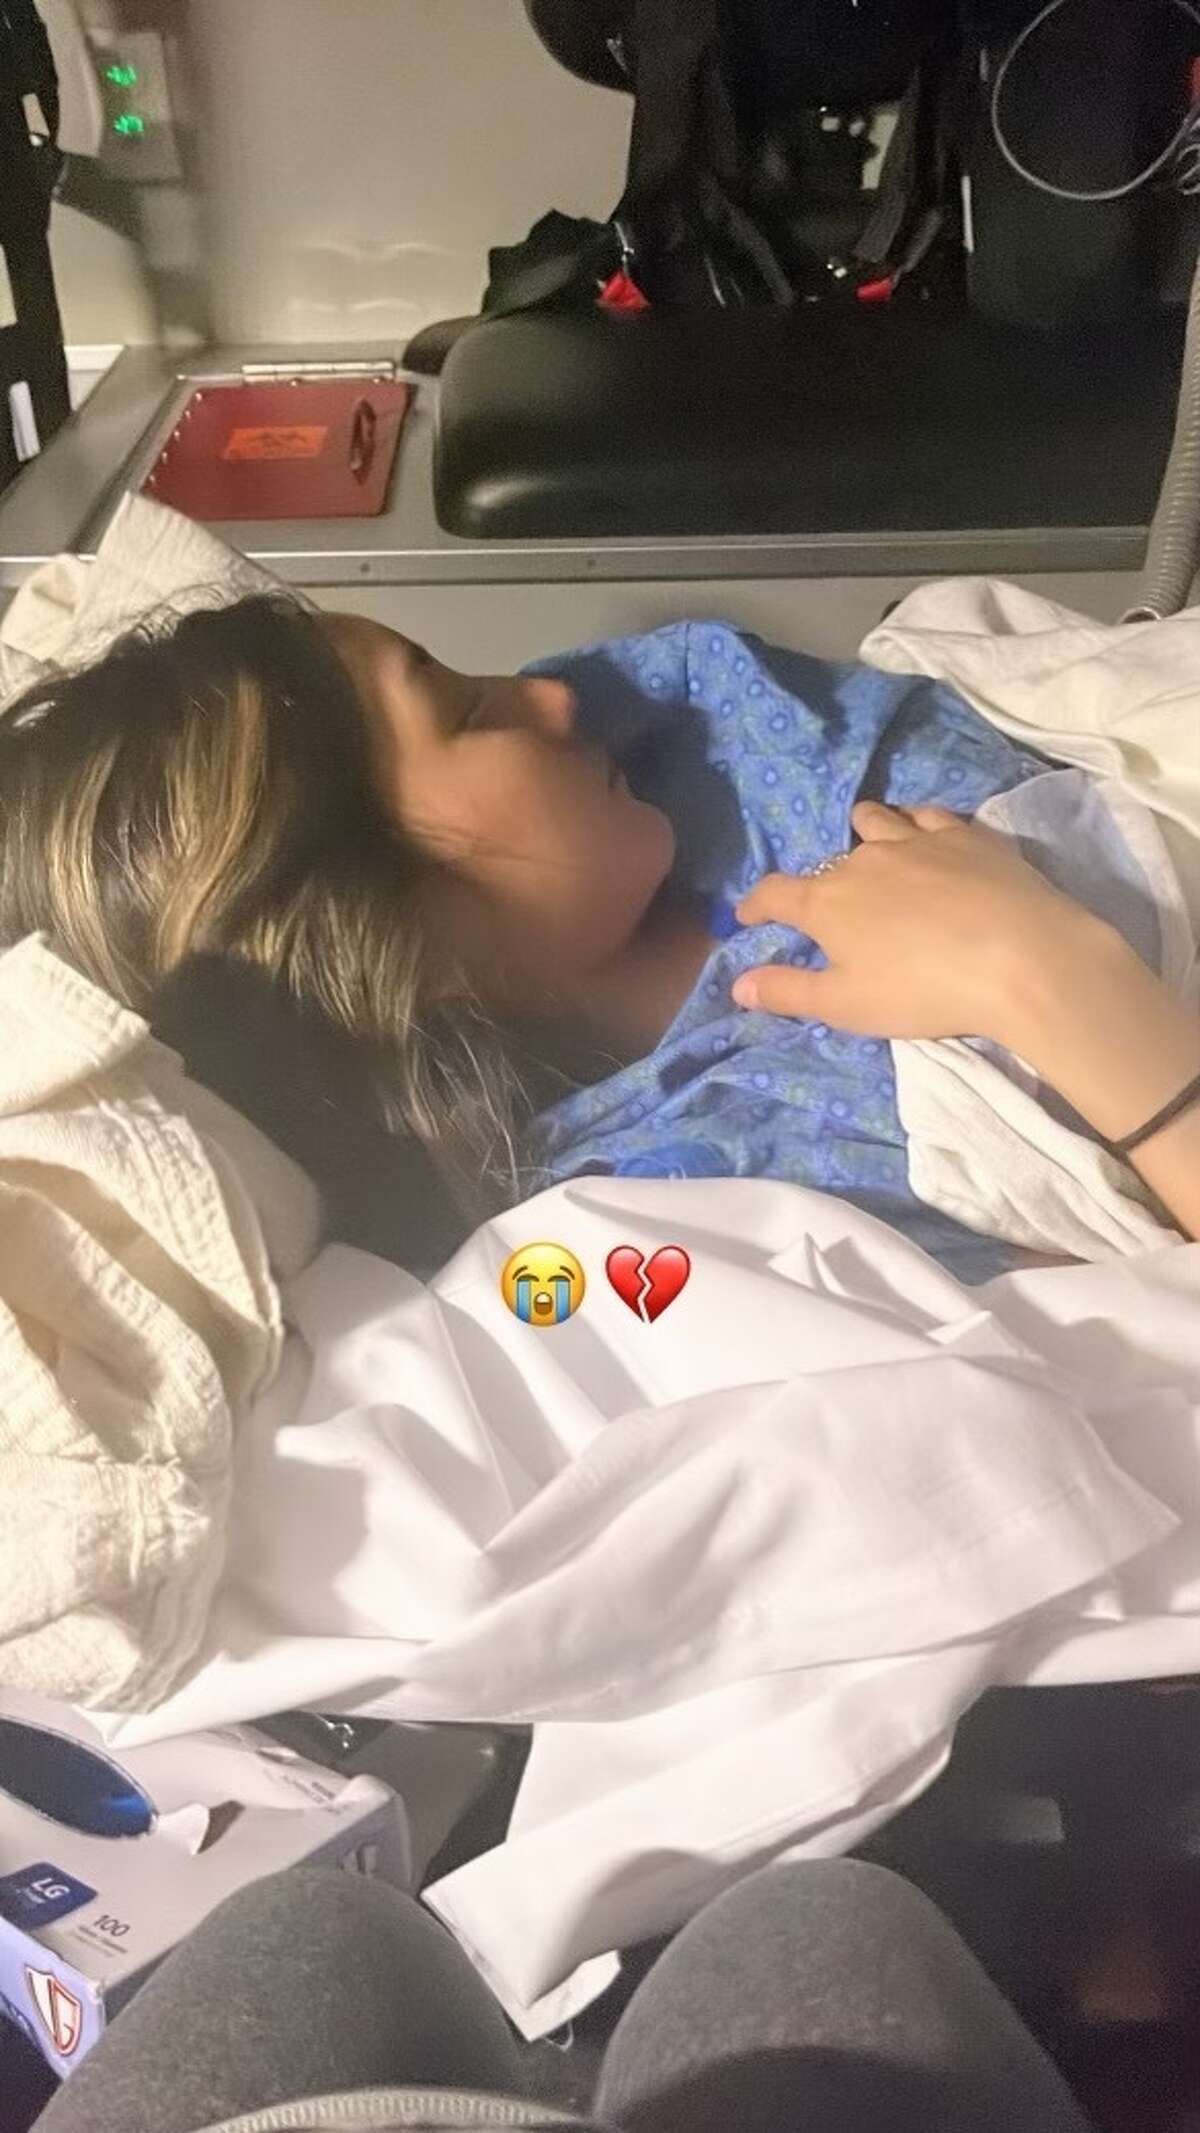 Belinda Mendoza shared a photo of her eighth-grade daughter, who was hospitalized on May 15 and then transported to Lubbock’s Covenant Hospital, where she spent parts of three days in the ICU -- the result of an assault at Alamo Junior High School.